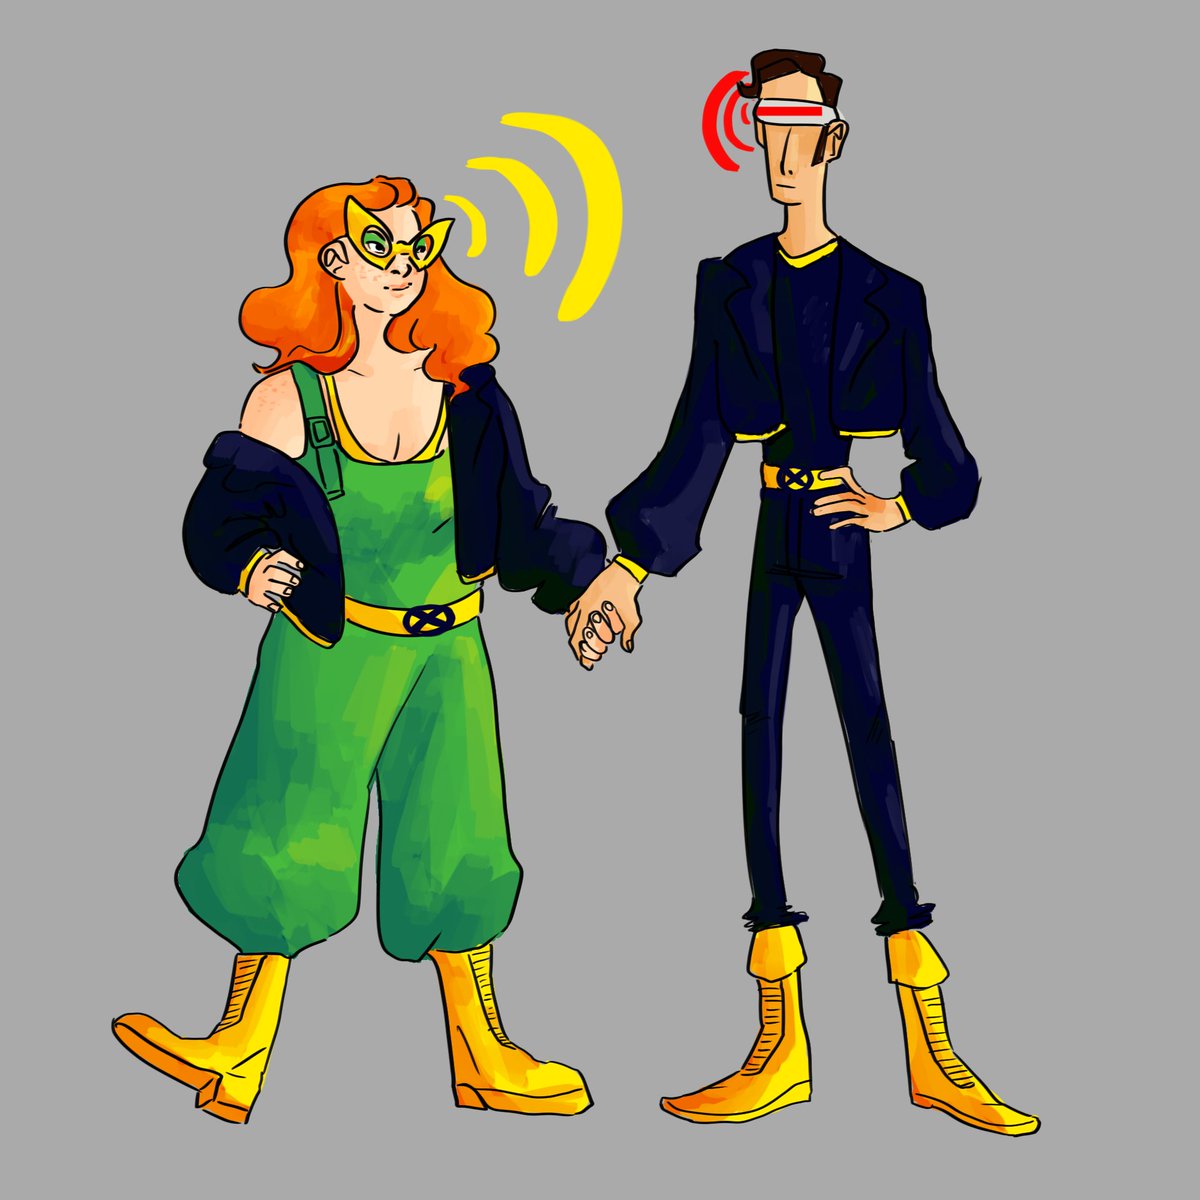 Second  #xmen pair, Jean Grey and Cyclops. I love the idea of a chubby Jean snce her whole thing is mind over matter, and she has no reason to be especially fit or skinny. Plus it creates contrast with my favourite type of cyclops, tall skinny legend. Also matching jackets uwu